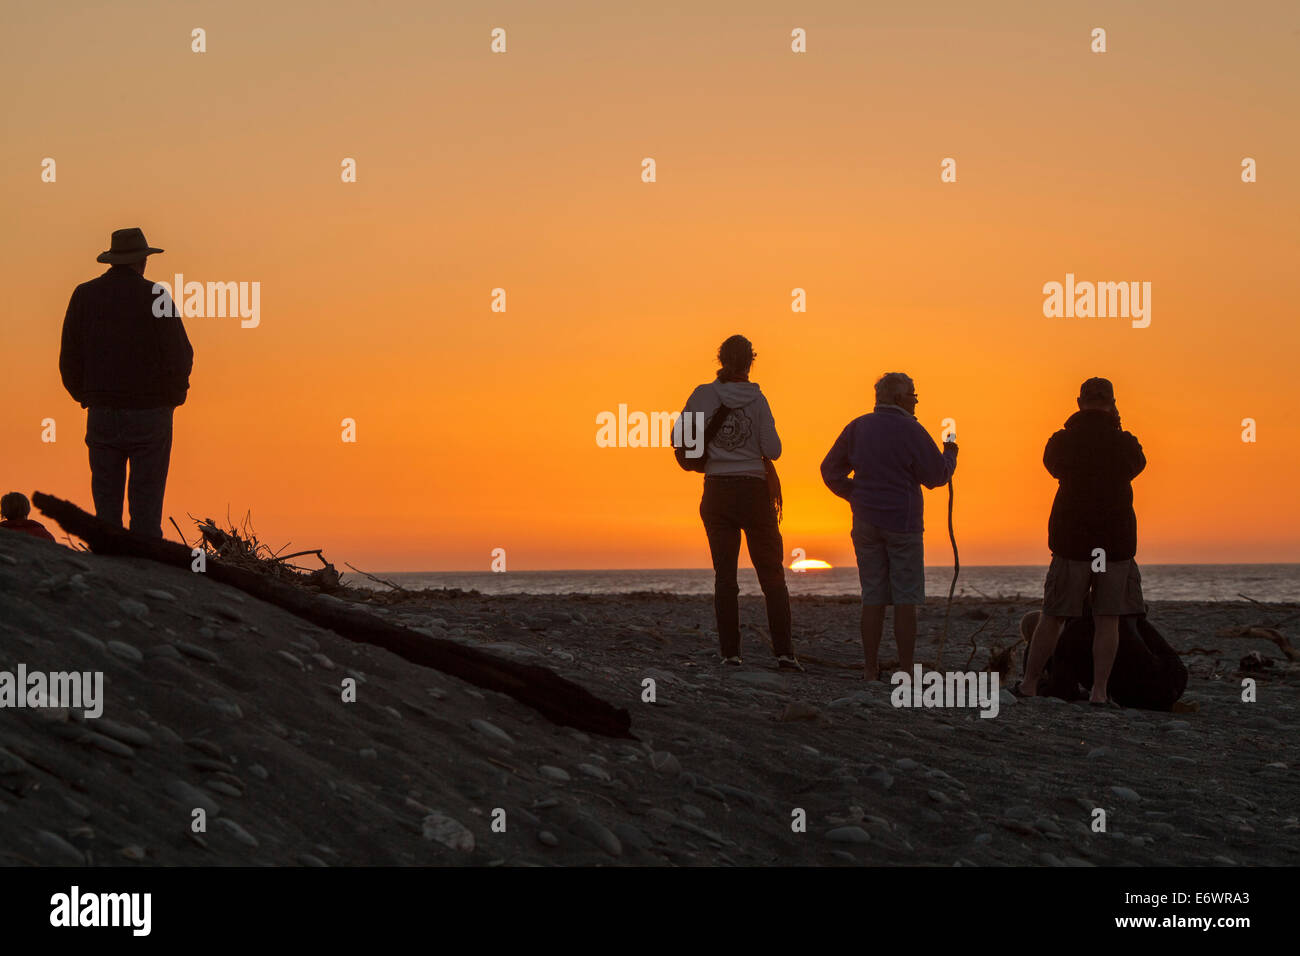 People watching the sunset on the beach, silhouettes, South Island, New Zealand Stock Photo